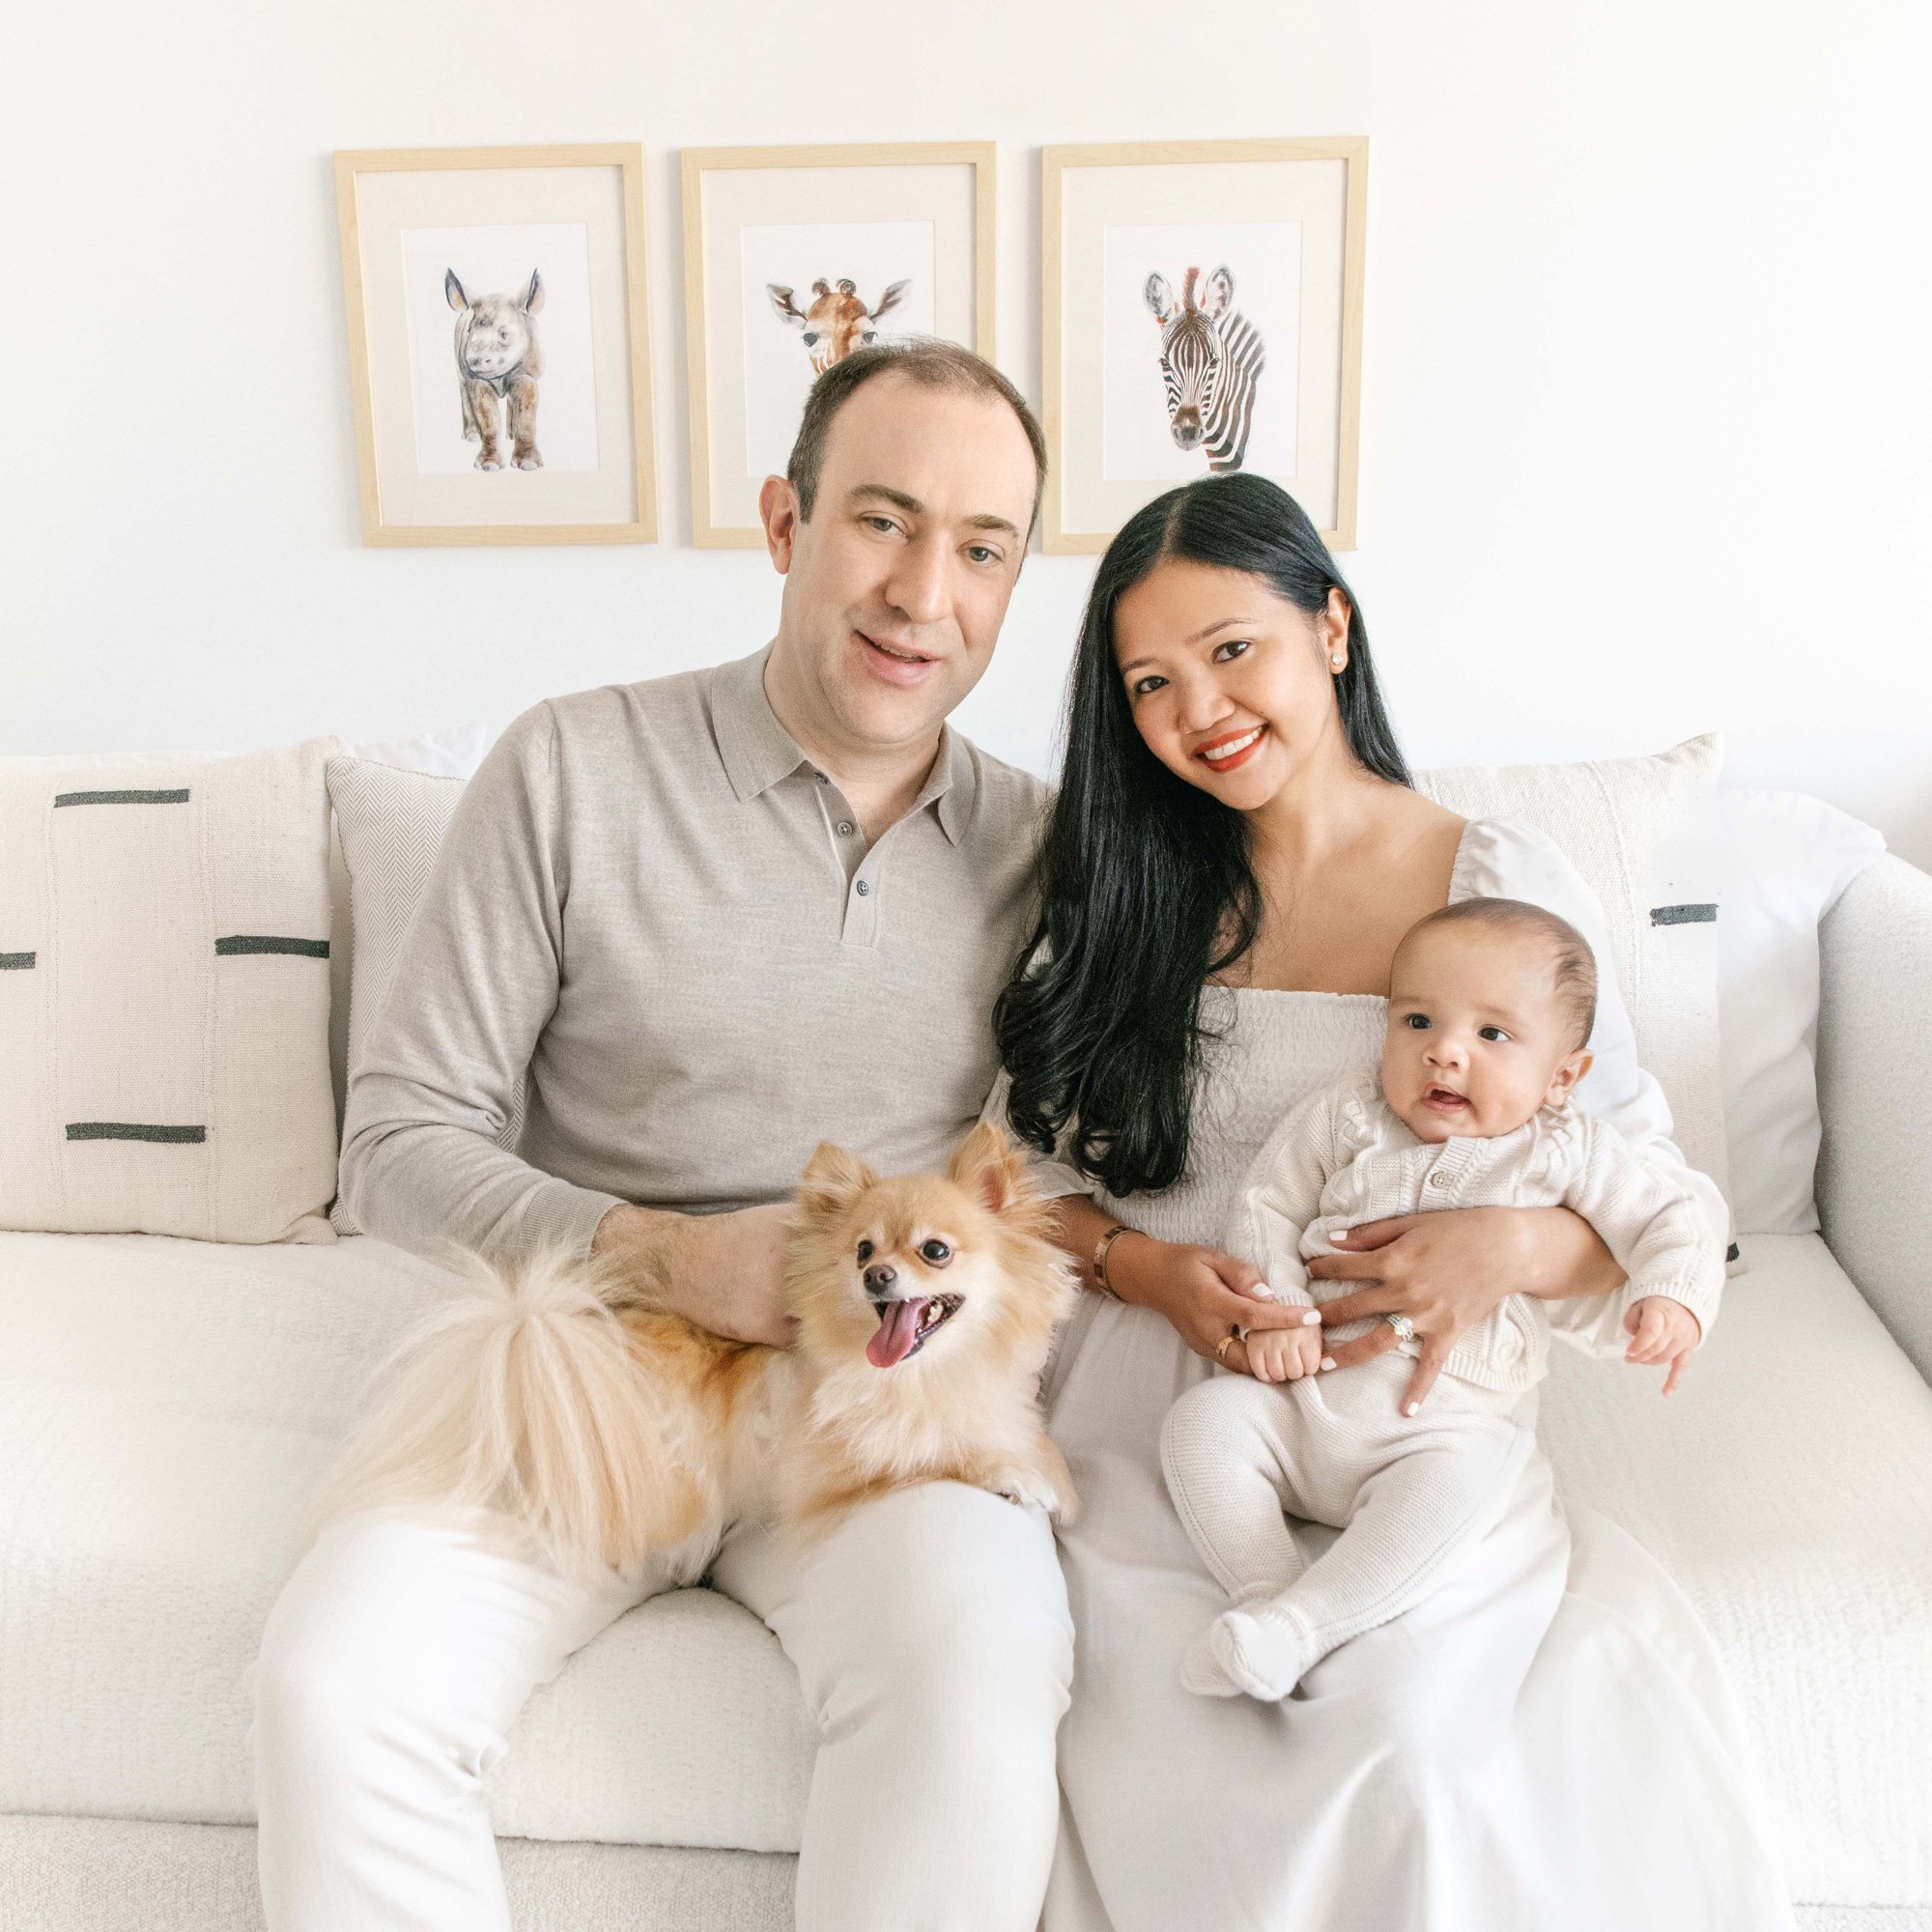  In-home family portrait with a newborn and dog all together in the zoo nursery by Nicole Hawkins Photography. family of four #NicoleHawkinsPhotography #InHomeNewborns #NurseryNewborns #NYCbabyphotography #babyportraits #ZooNursery #familyportraits 